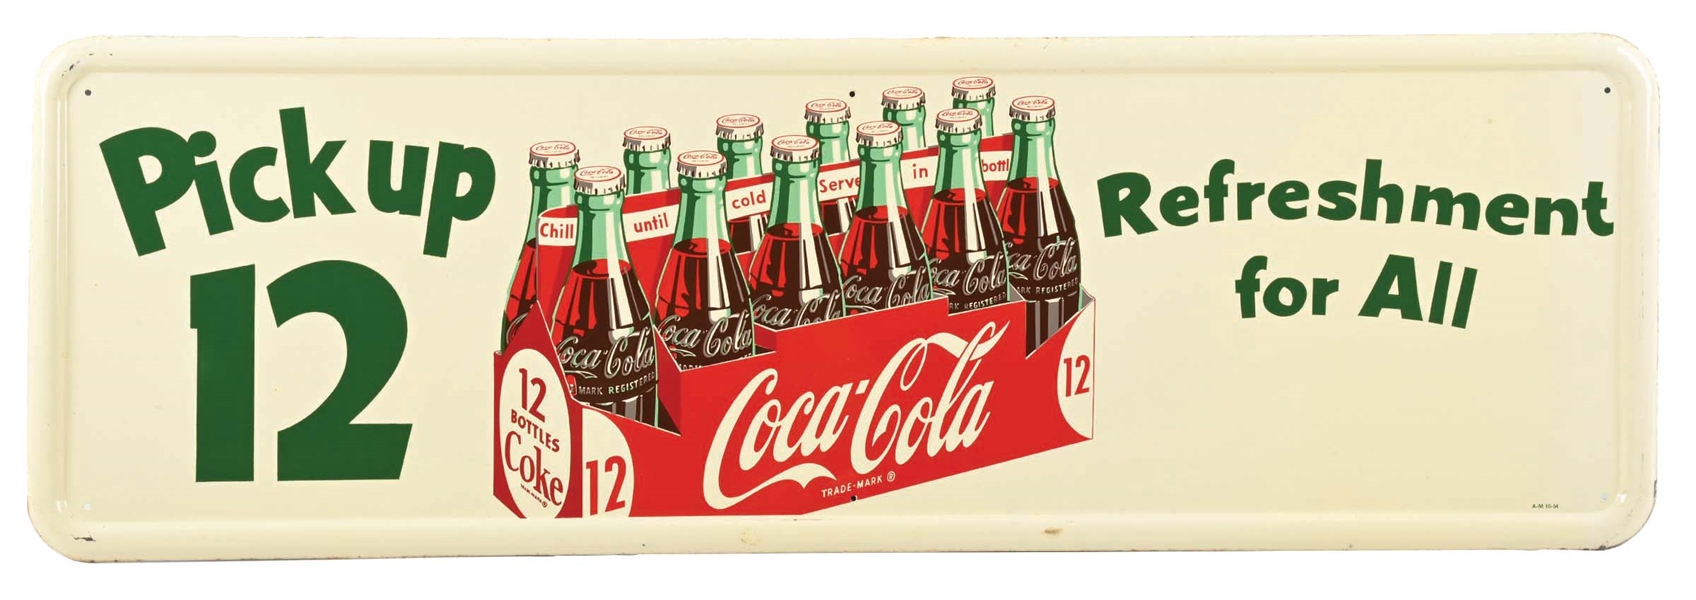 COCA-COLA "PICK UP 12 FOR HOME REFRESHMENT" SELF-FRAMED TIN SIGN.